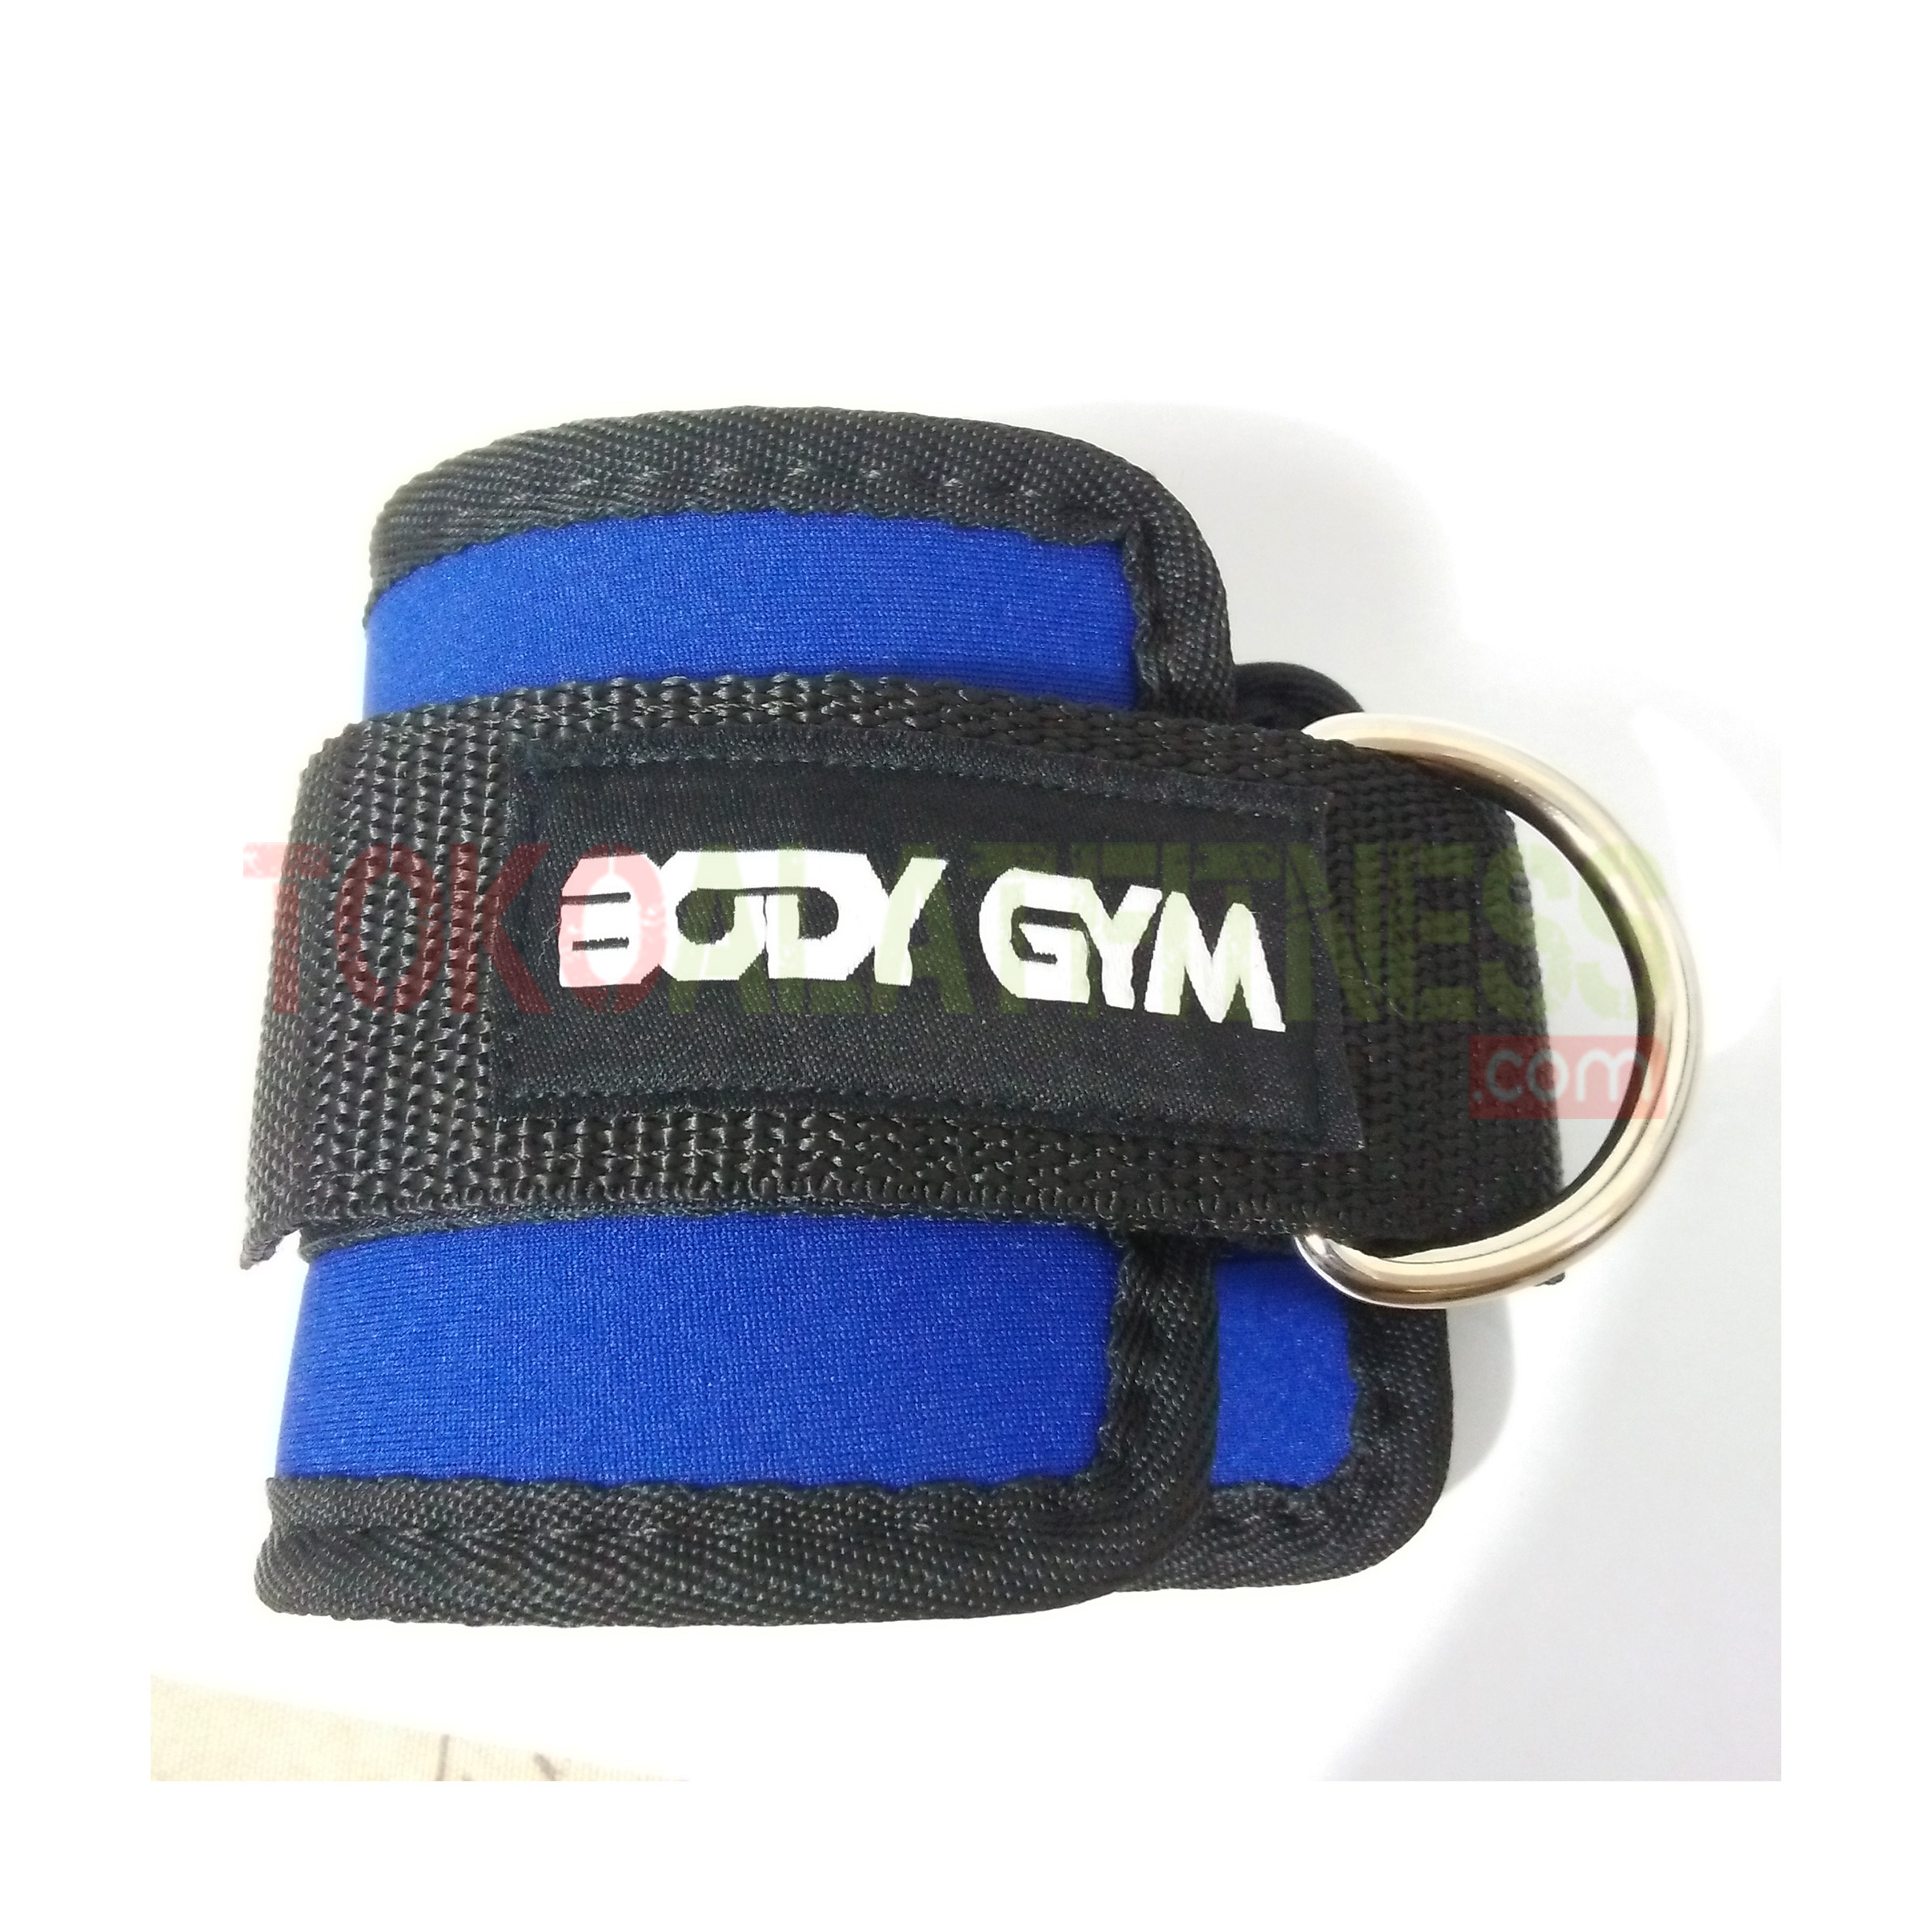 fa ankle lifting strap - Ankle Lifting Strap Body Gym